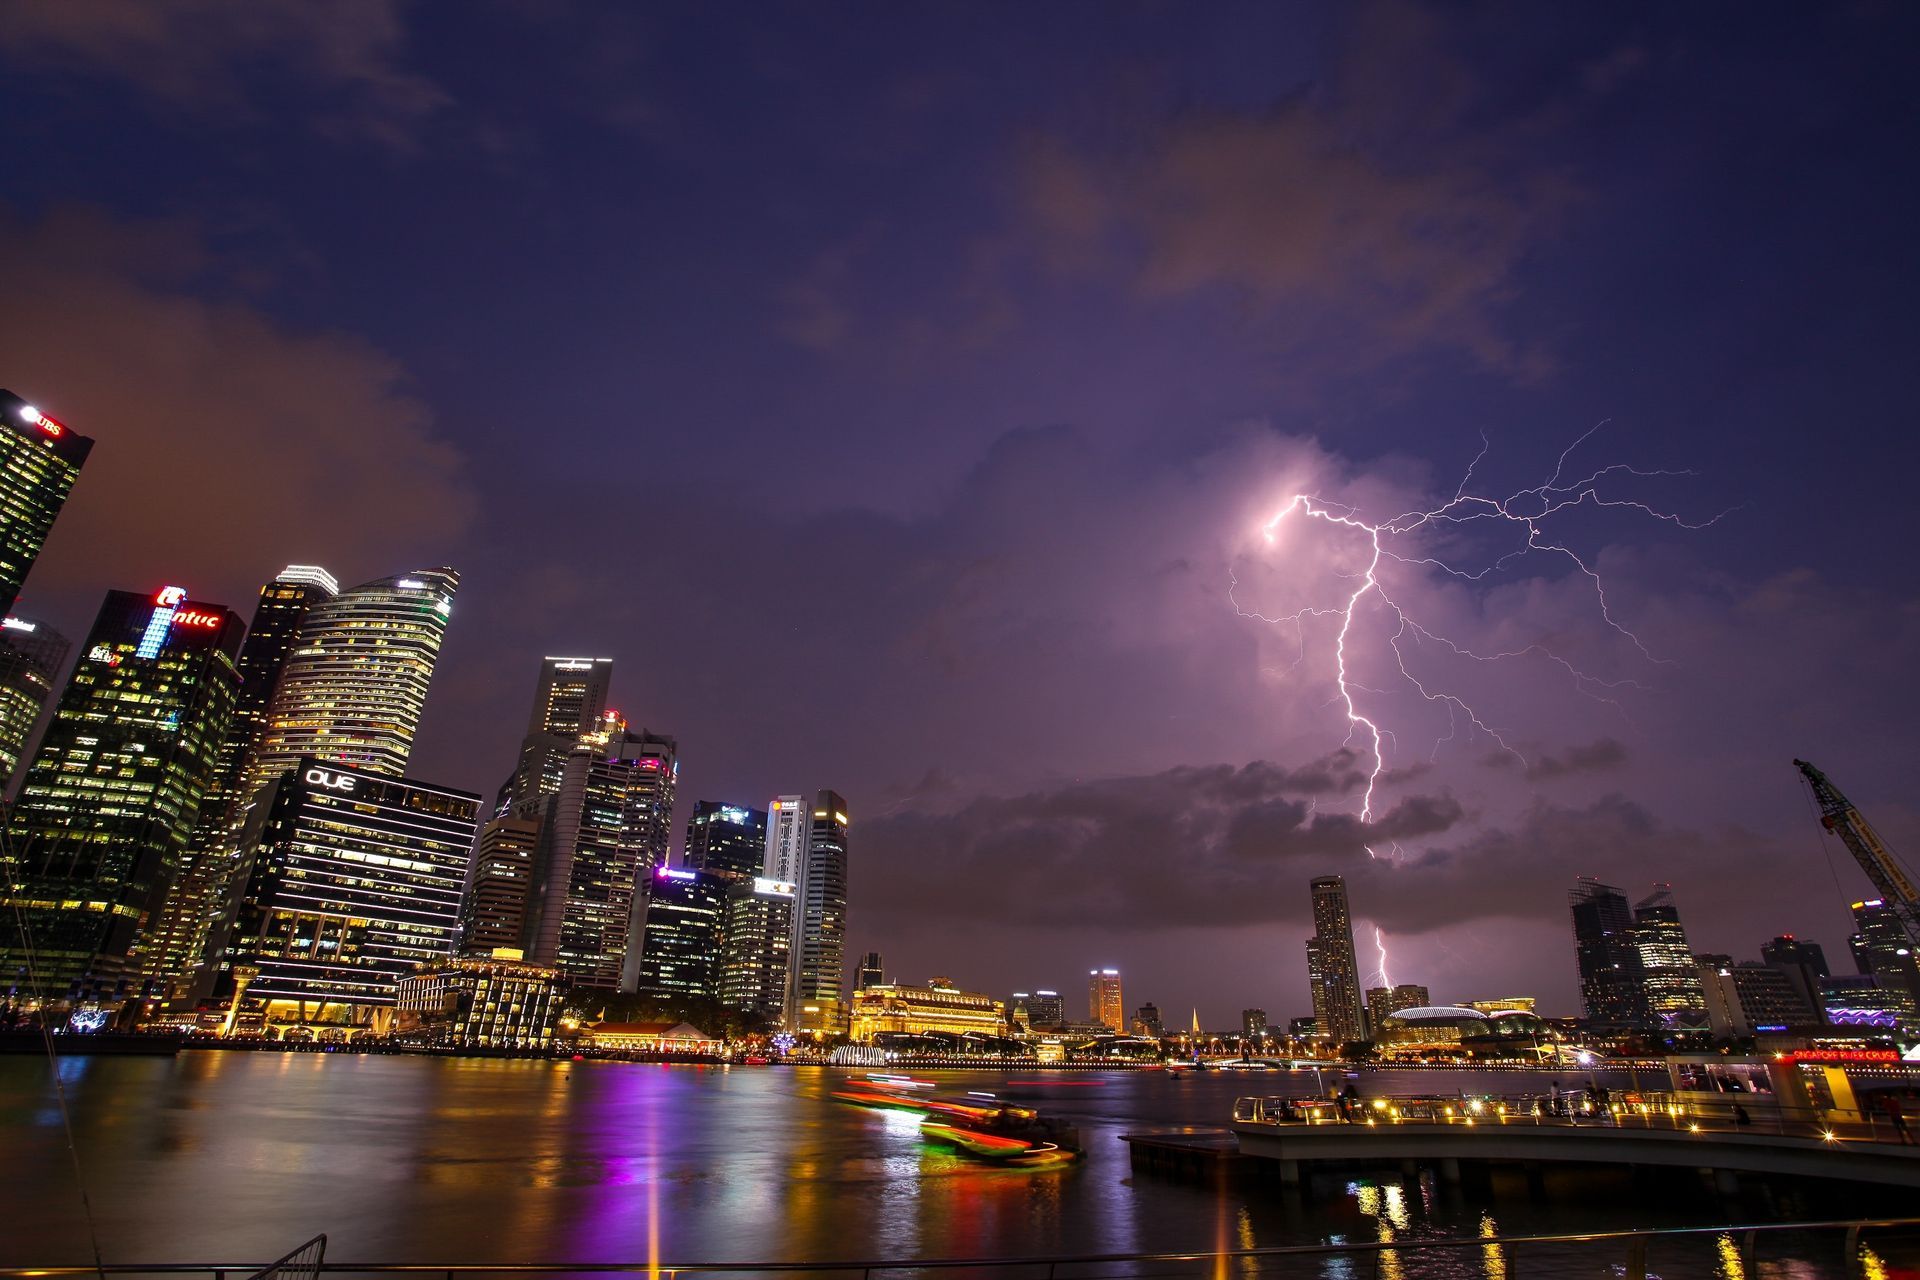 lightning strikes in a big city, no concern with a Transient voltage surge suppressor